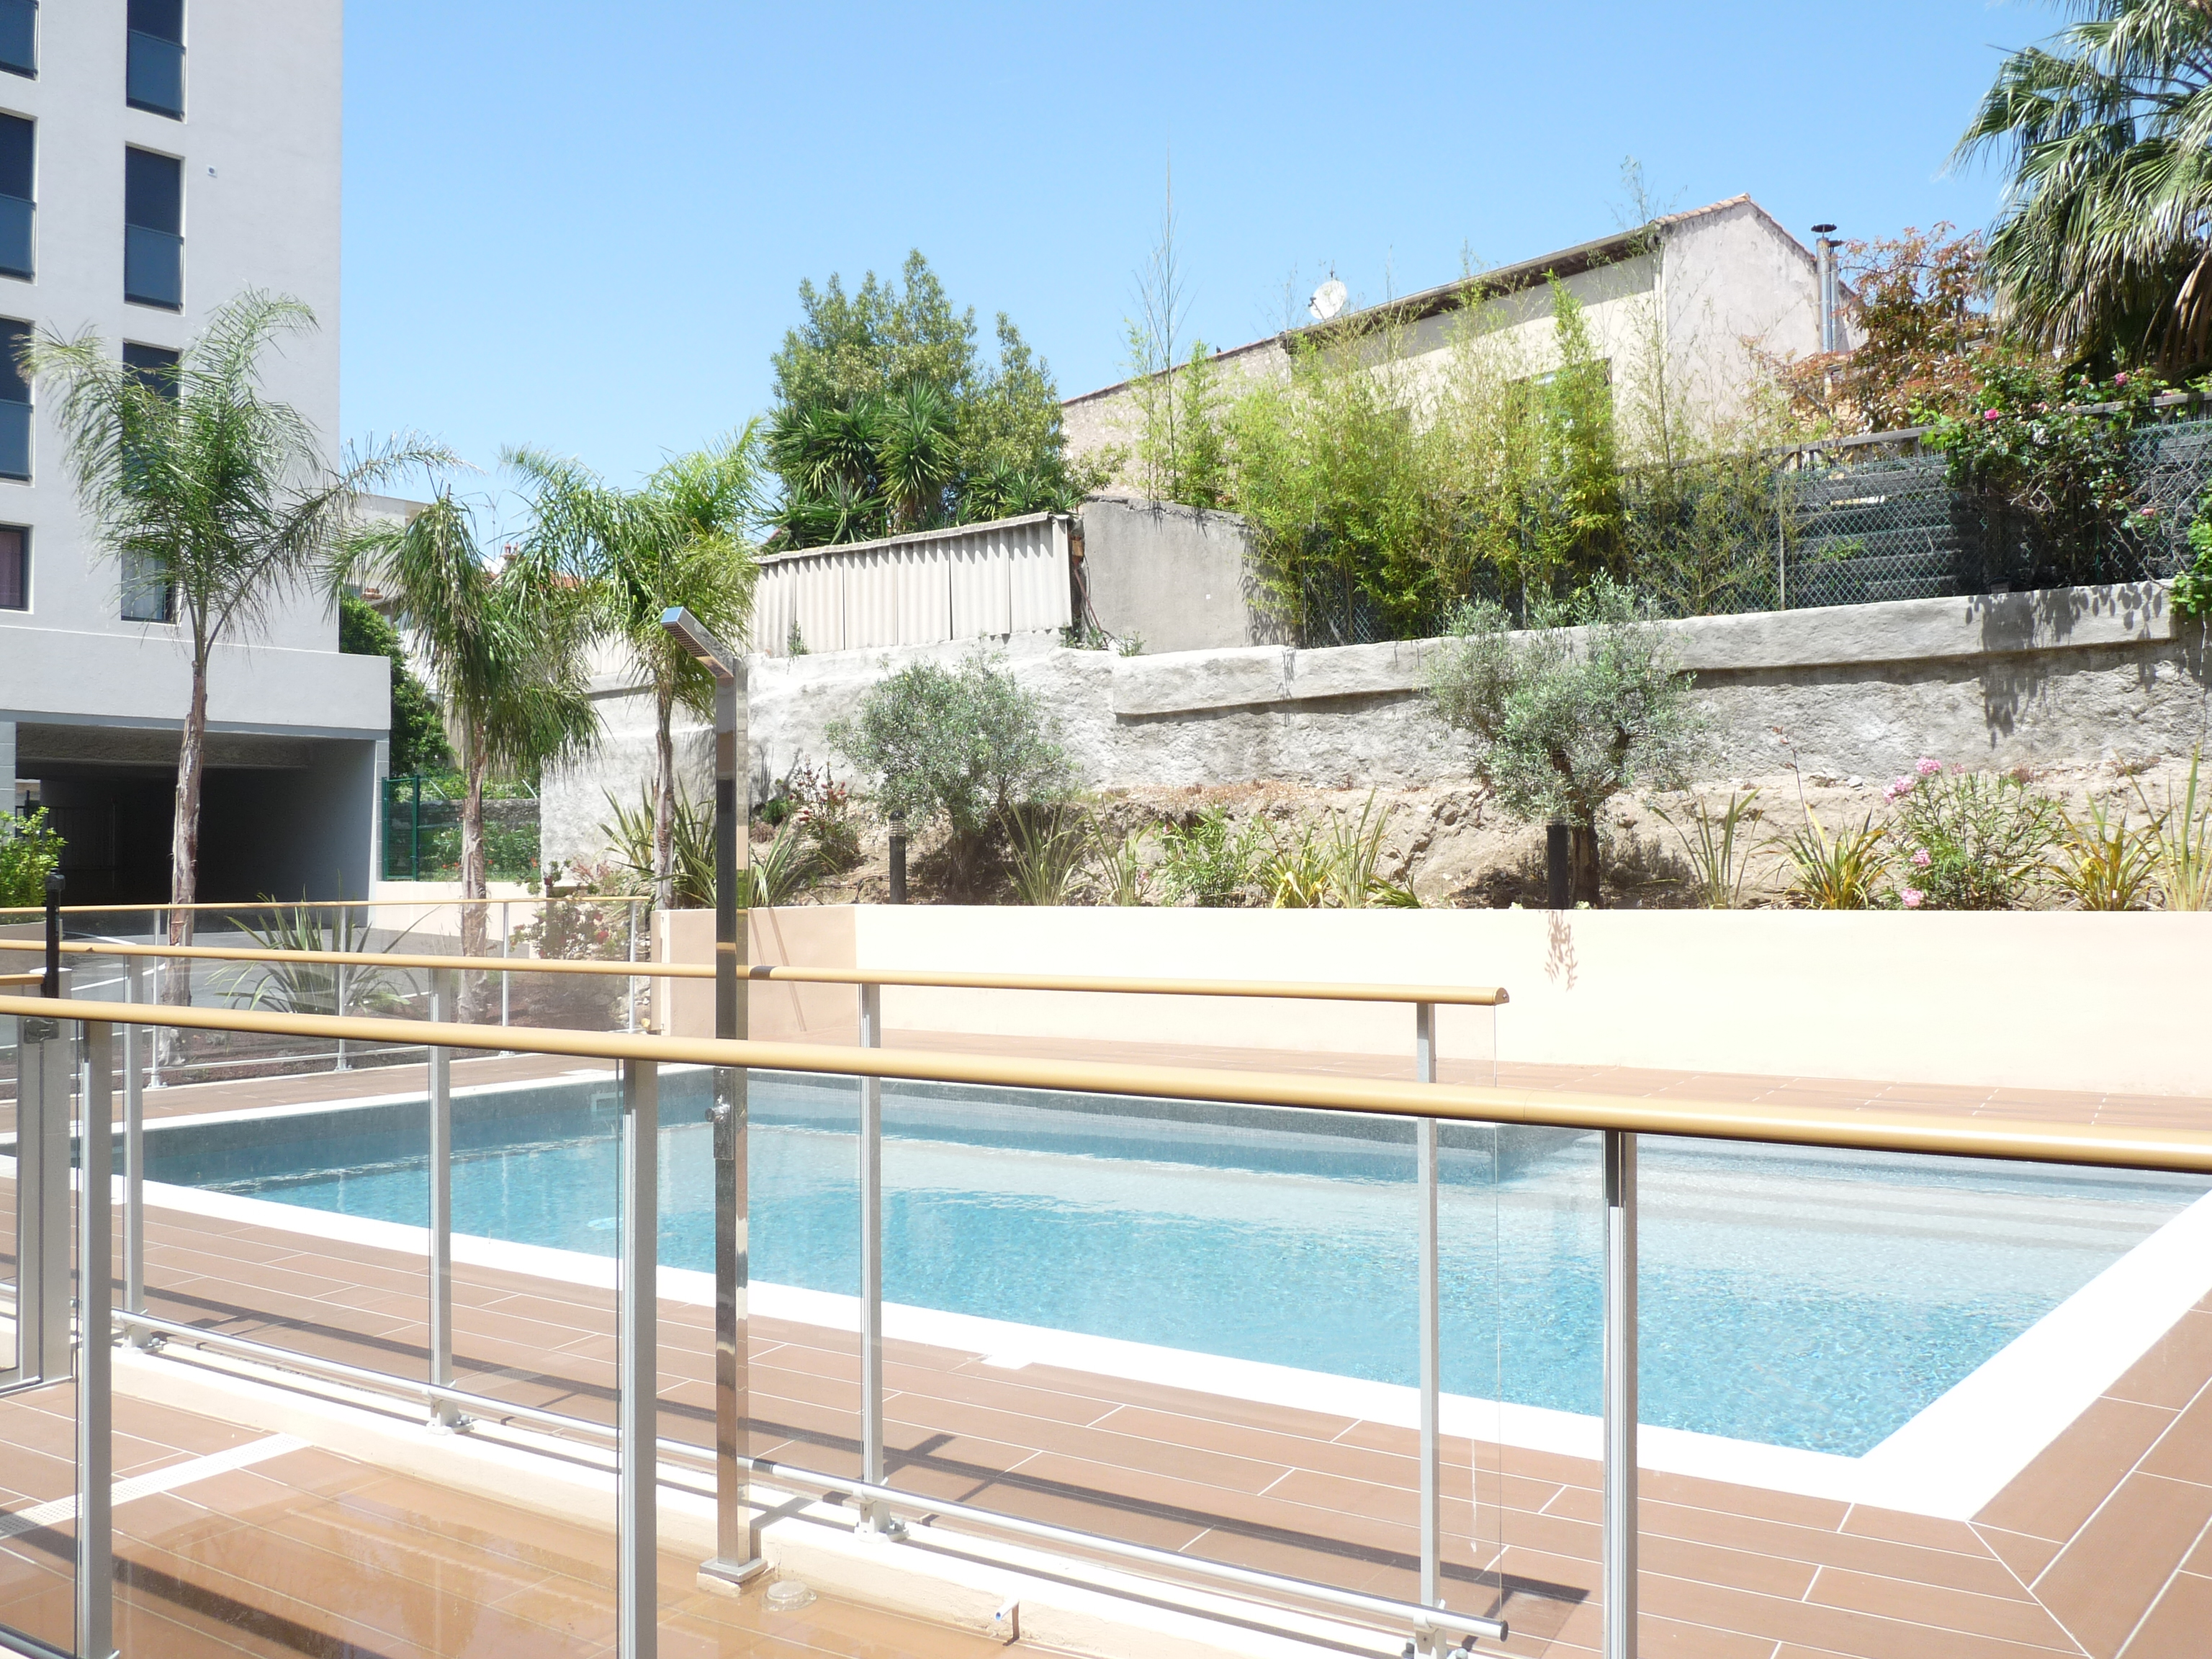 Two bedroom apartment in the Palm Beach area of Cannes, quiet residential area just by the beaches. - 1956 0